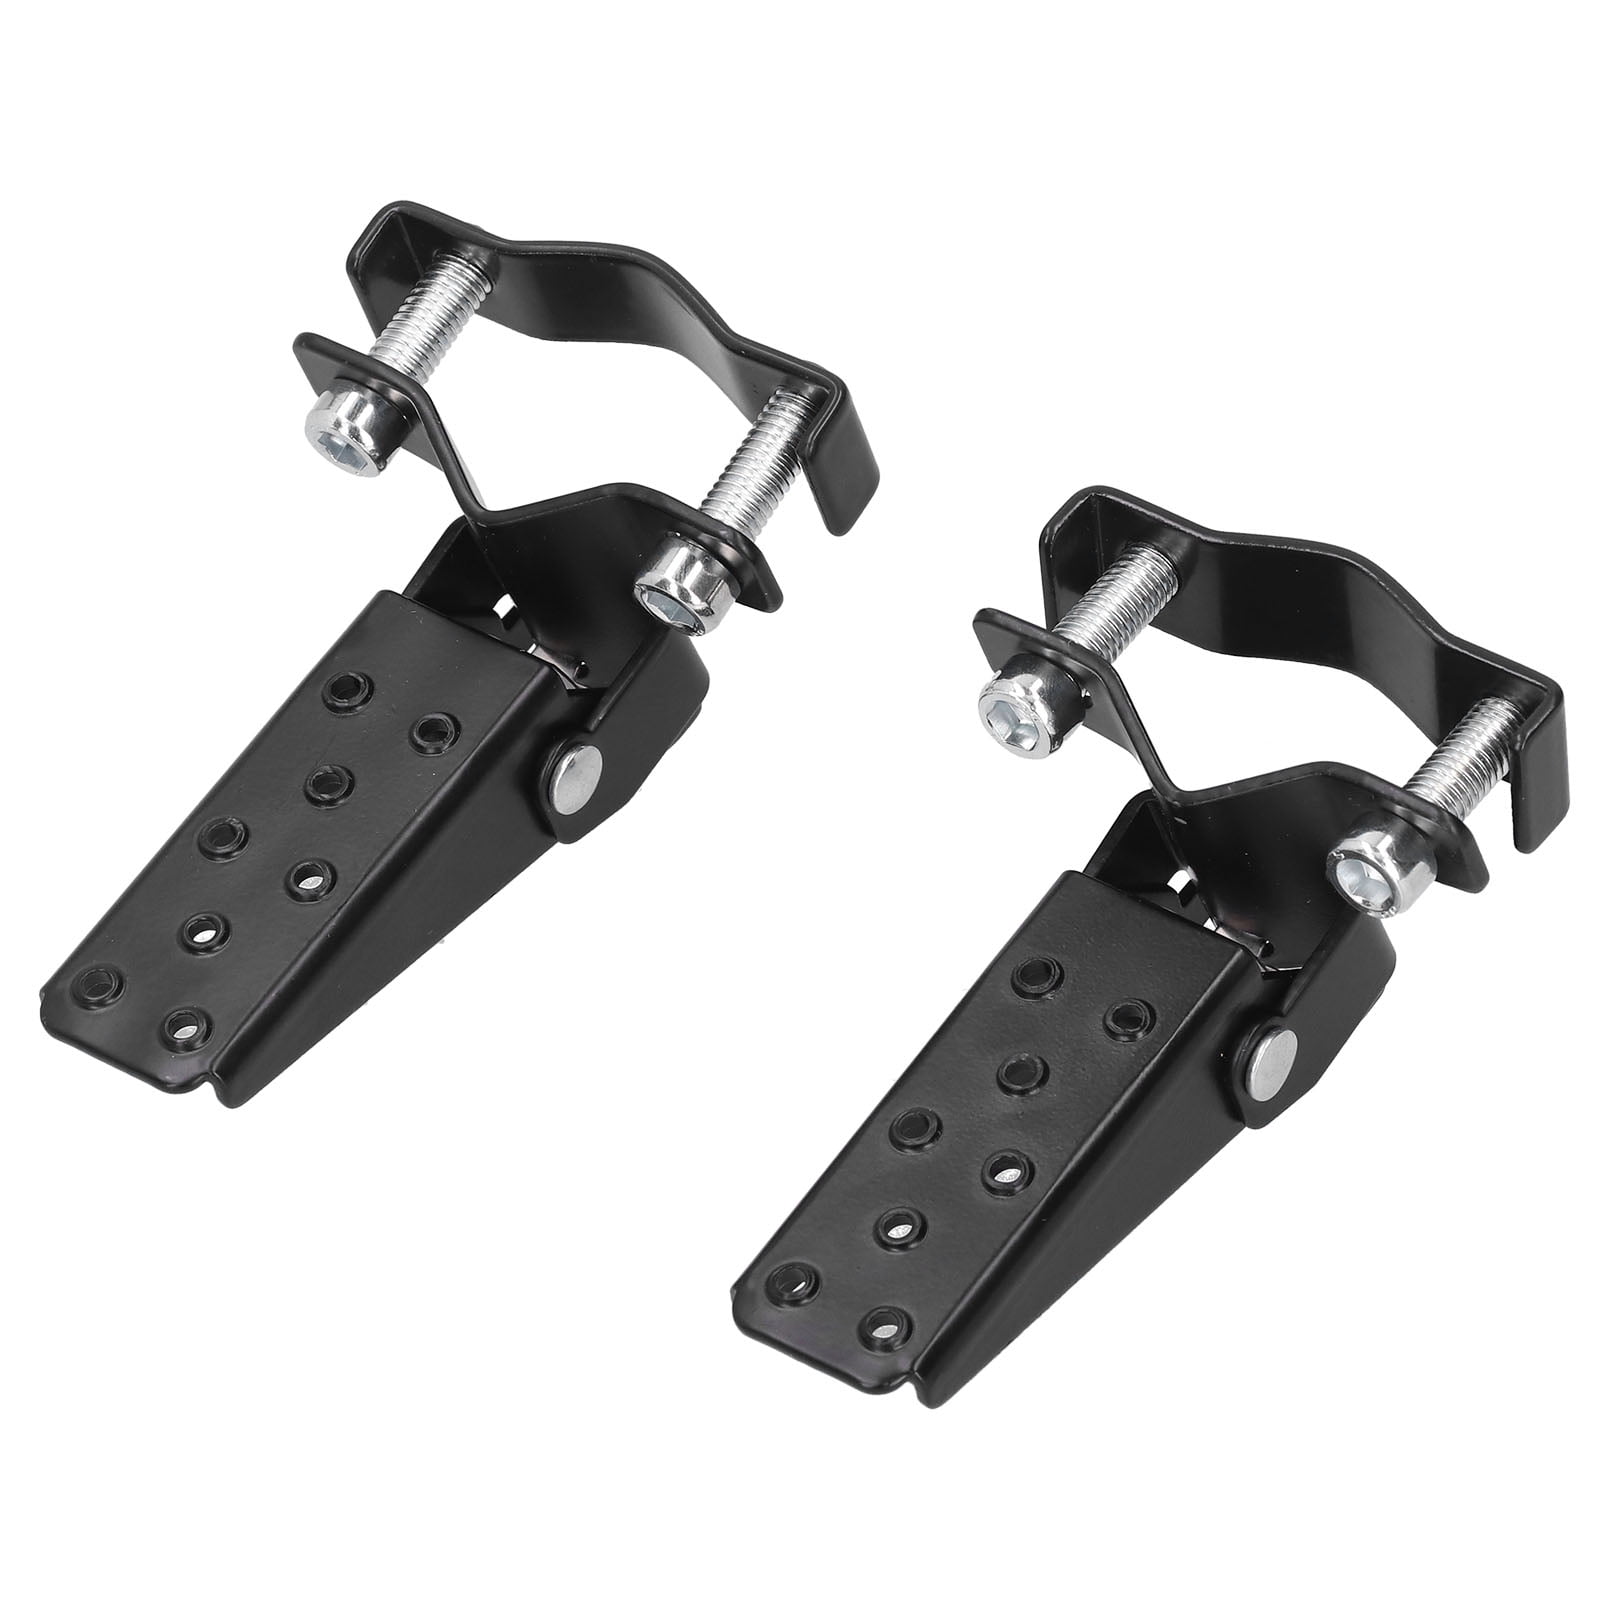 Motorcycle Footpegs Black Universal Steel Foldable Foot Pegs with Mounting Screws Foot Pedal for Retro Motorcycle ATV BMX Bikes Electric Bicycles Scooters 